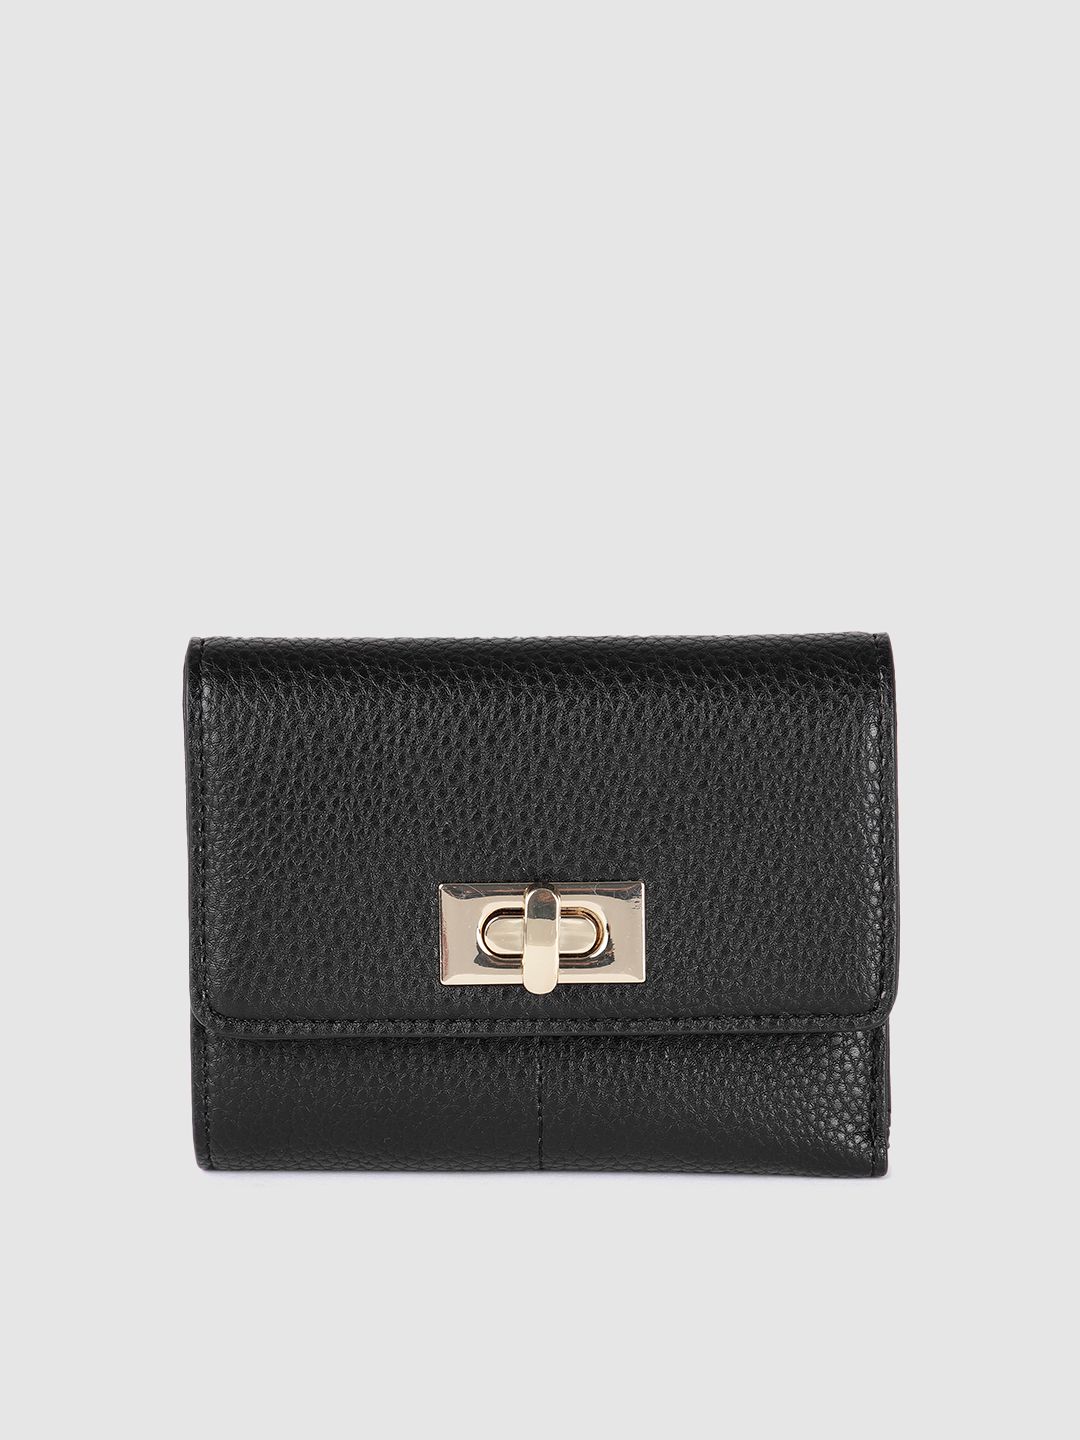 Accessorize Women Black Textured Three Fold Wallet Price in India